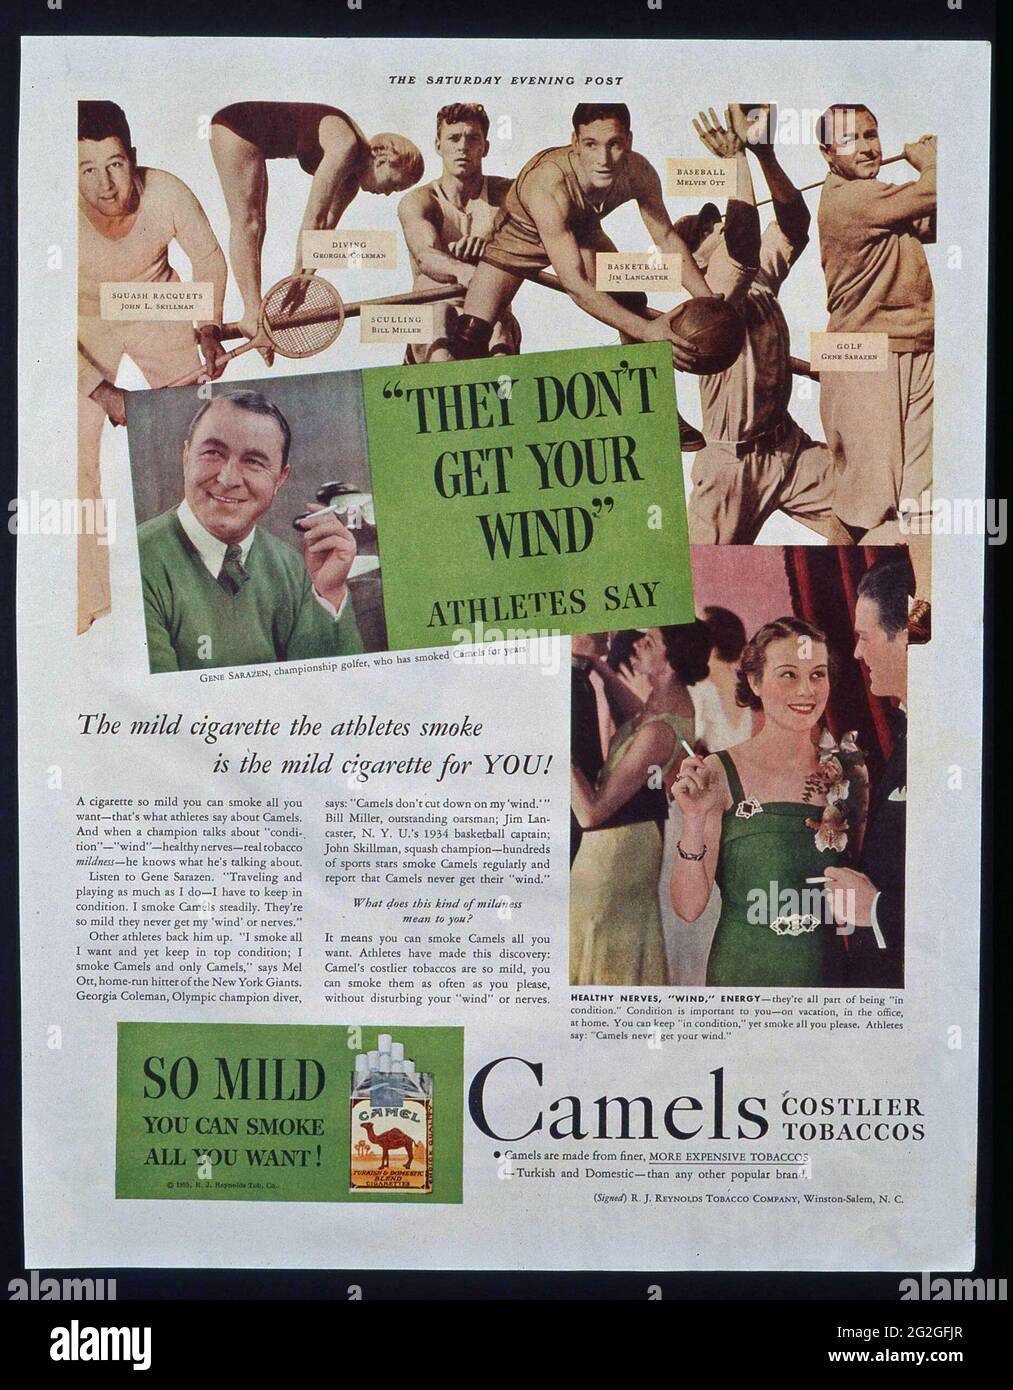 1935 Saturday Evening Post advertisement for Camel cigarettes showing  various athletes endorsing smoking Camels-"They Don't Get Your Wind-Athletes  say Stock Photo - Alamy